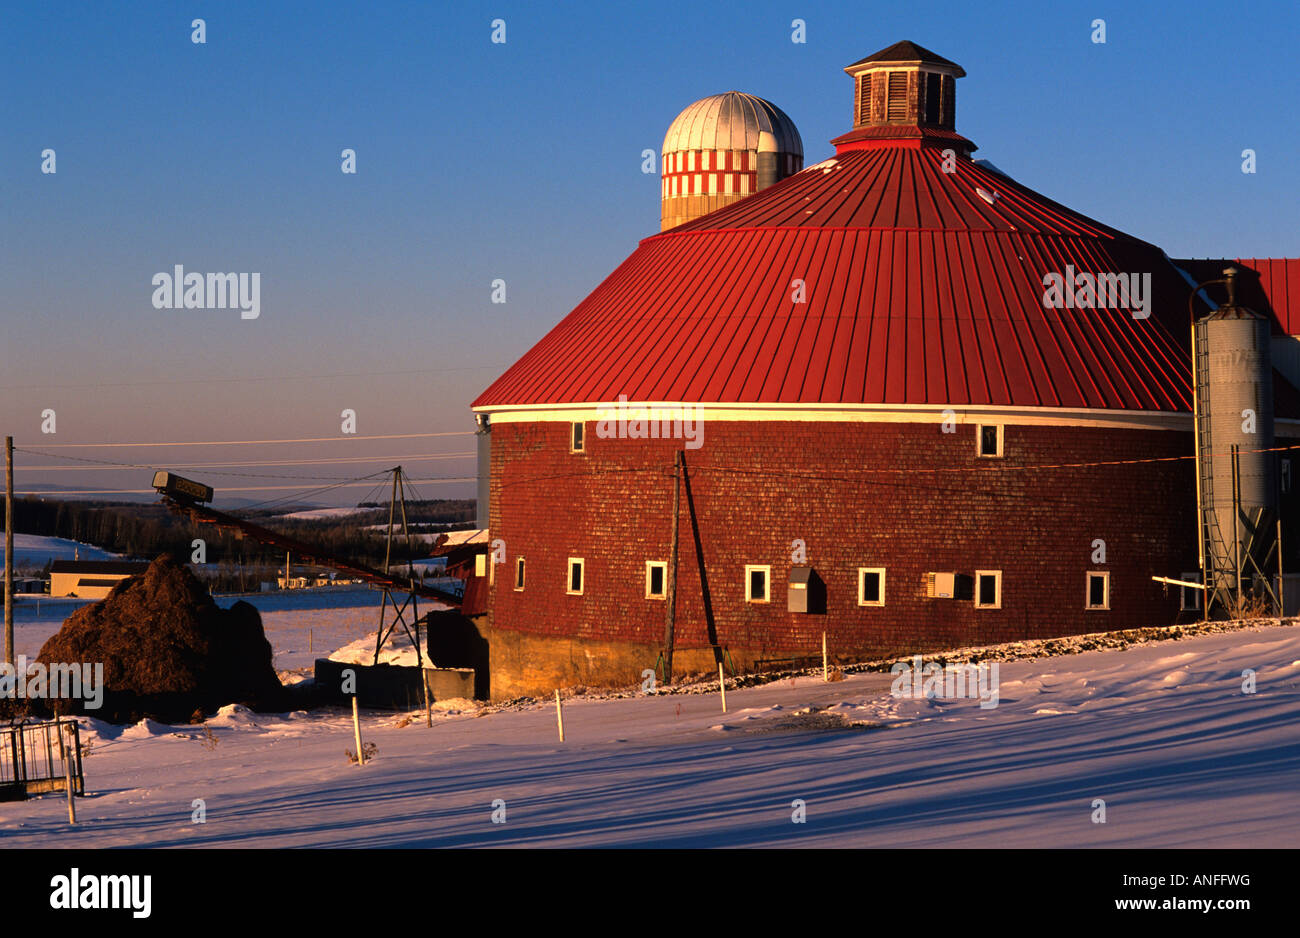 Round barn, Barnston, Eastern Townships, Quebec, Canada Foto Stock